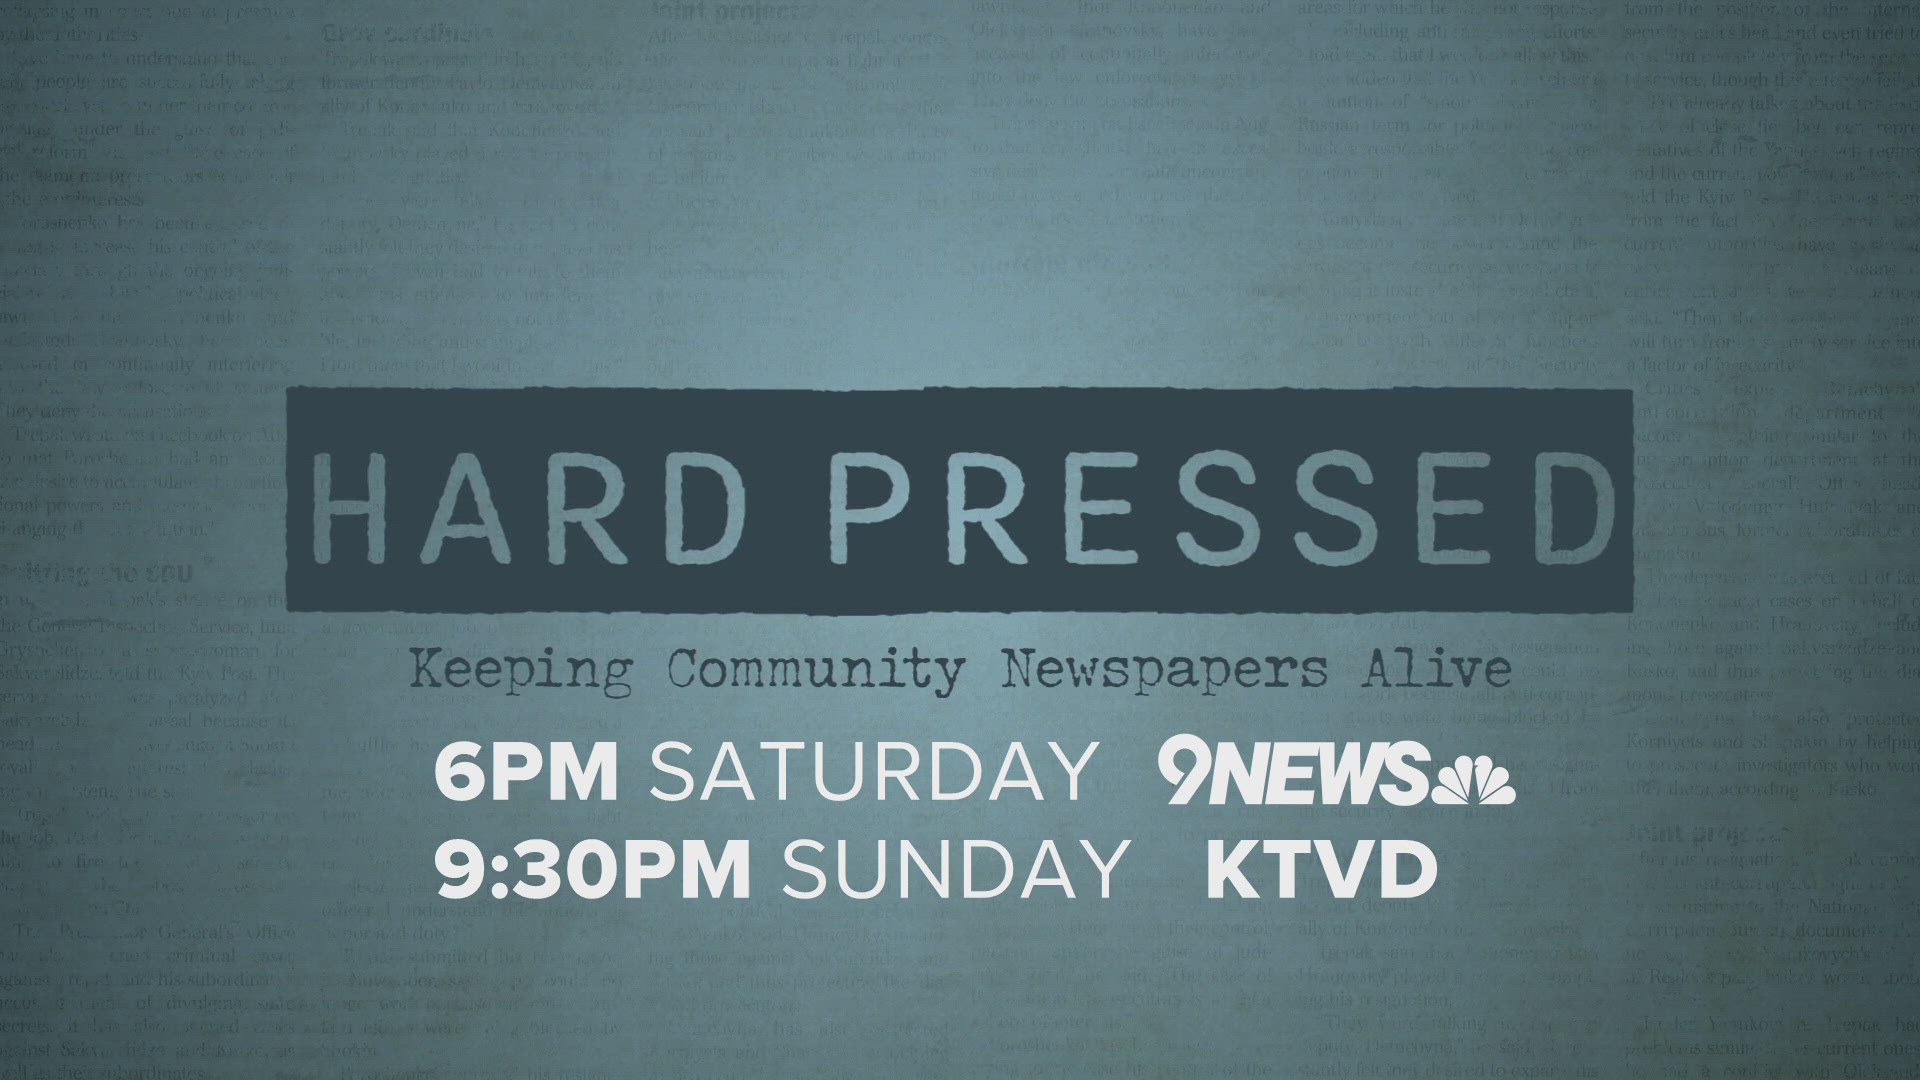 Publishers have used many creative ways to keep going. It's the topic of a 9NEWS Special called "Hard Pressed: Keeping Community Newspapers Alive."